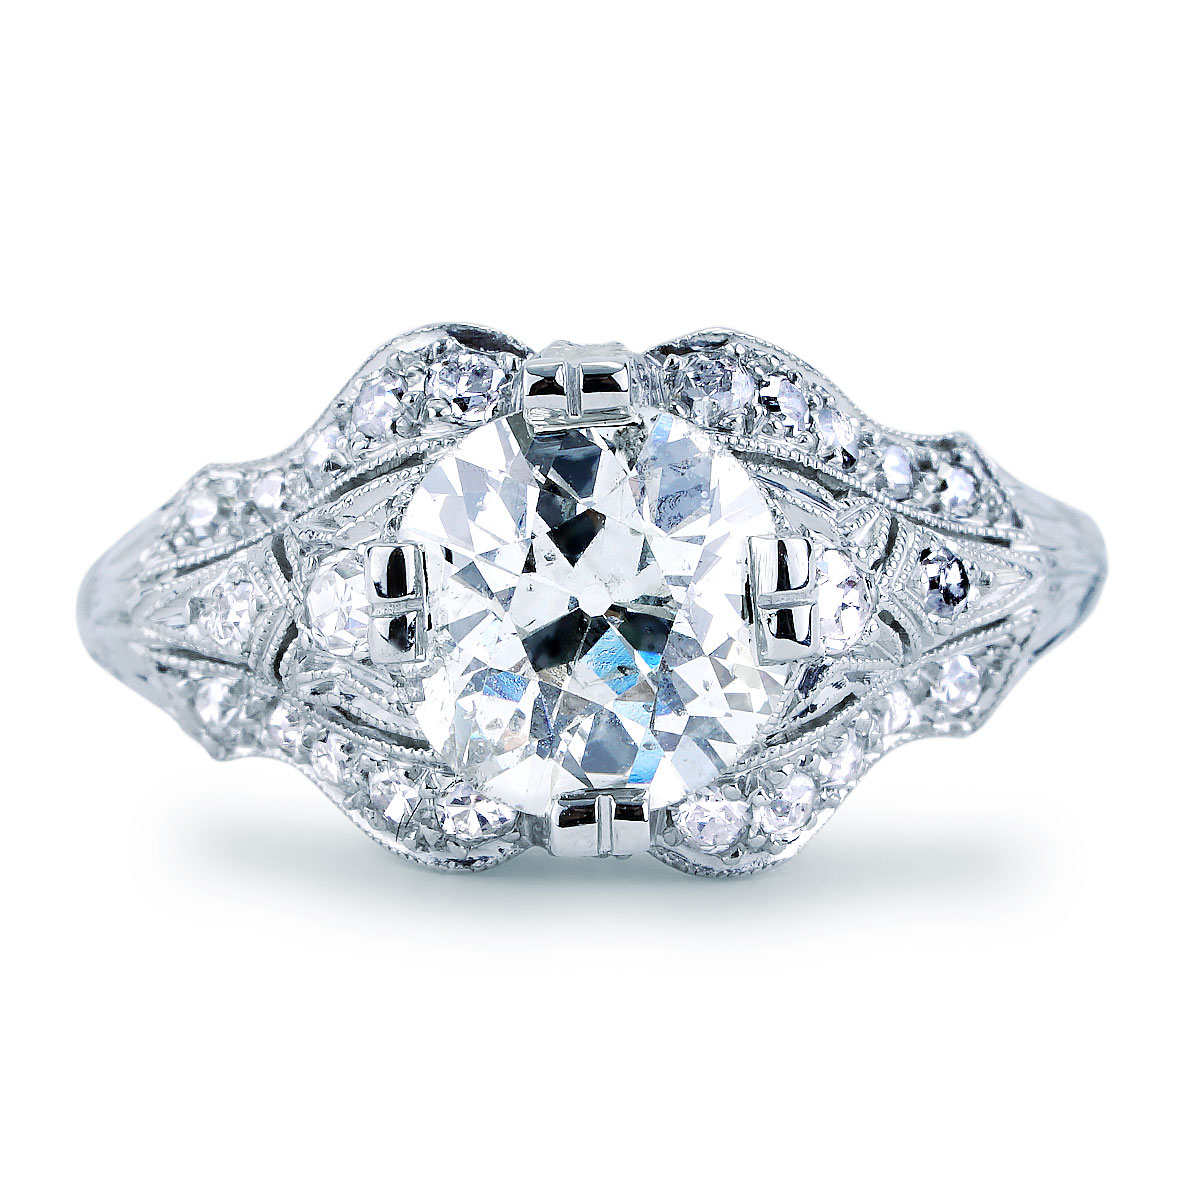 Insider) Guide to Buying a Vintage Engagement Ring